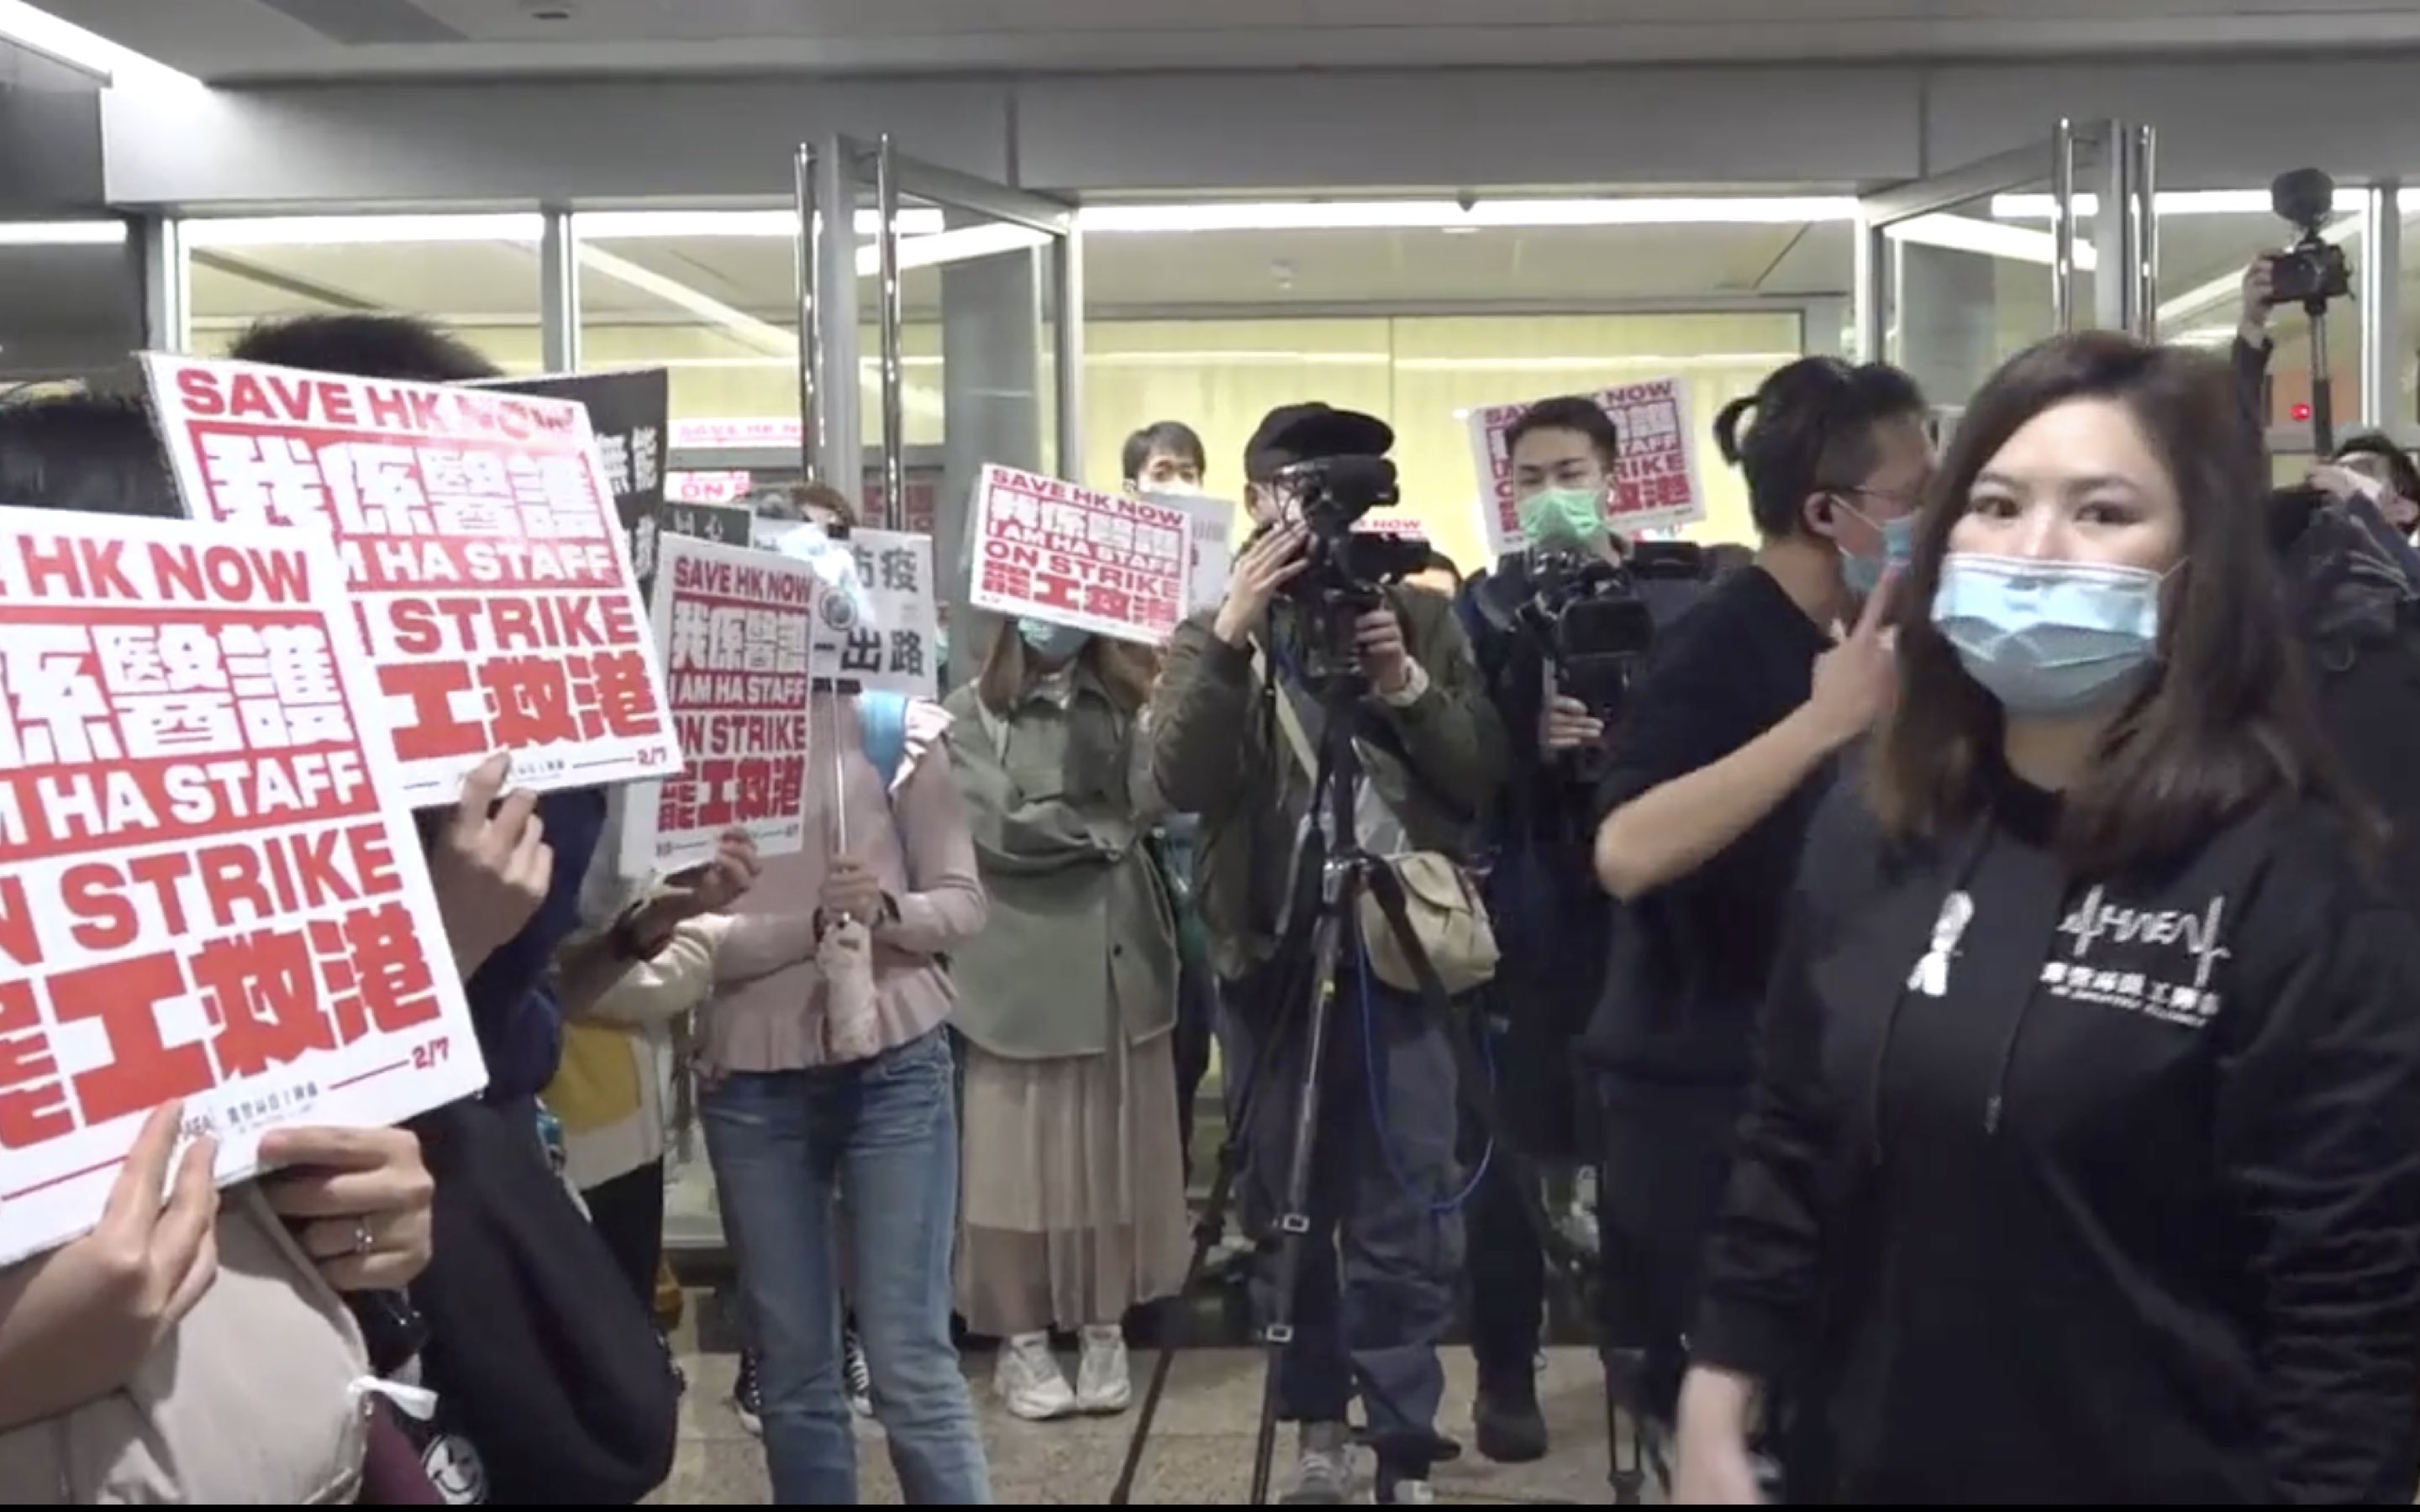 Striking hospital workers on the fourth floor of the Hospital Authority HQ. Screengrab via Facebook/Stand News.